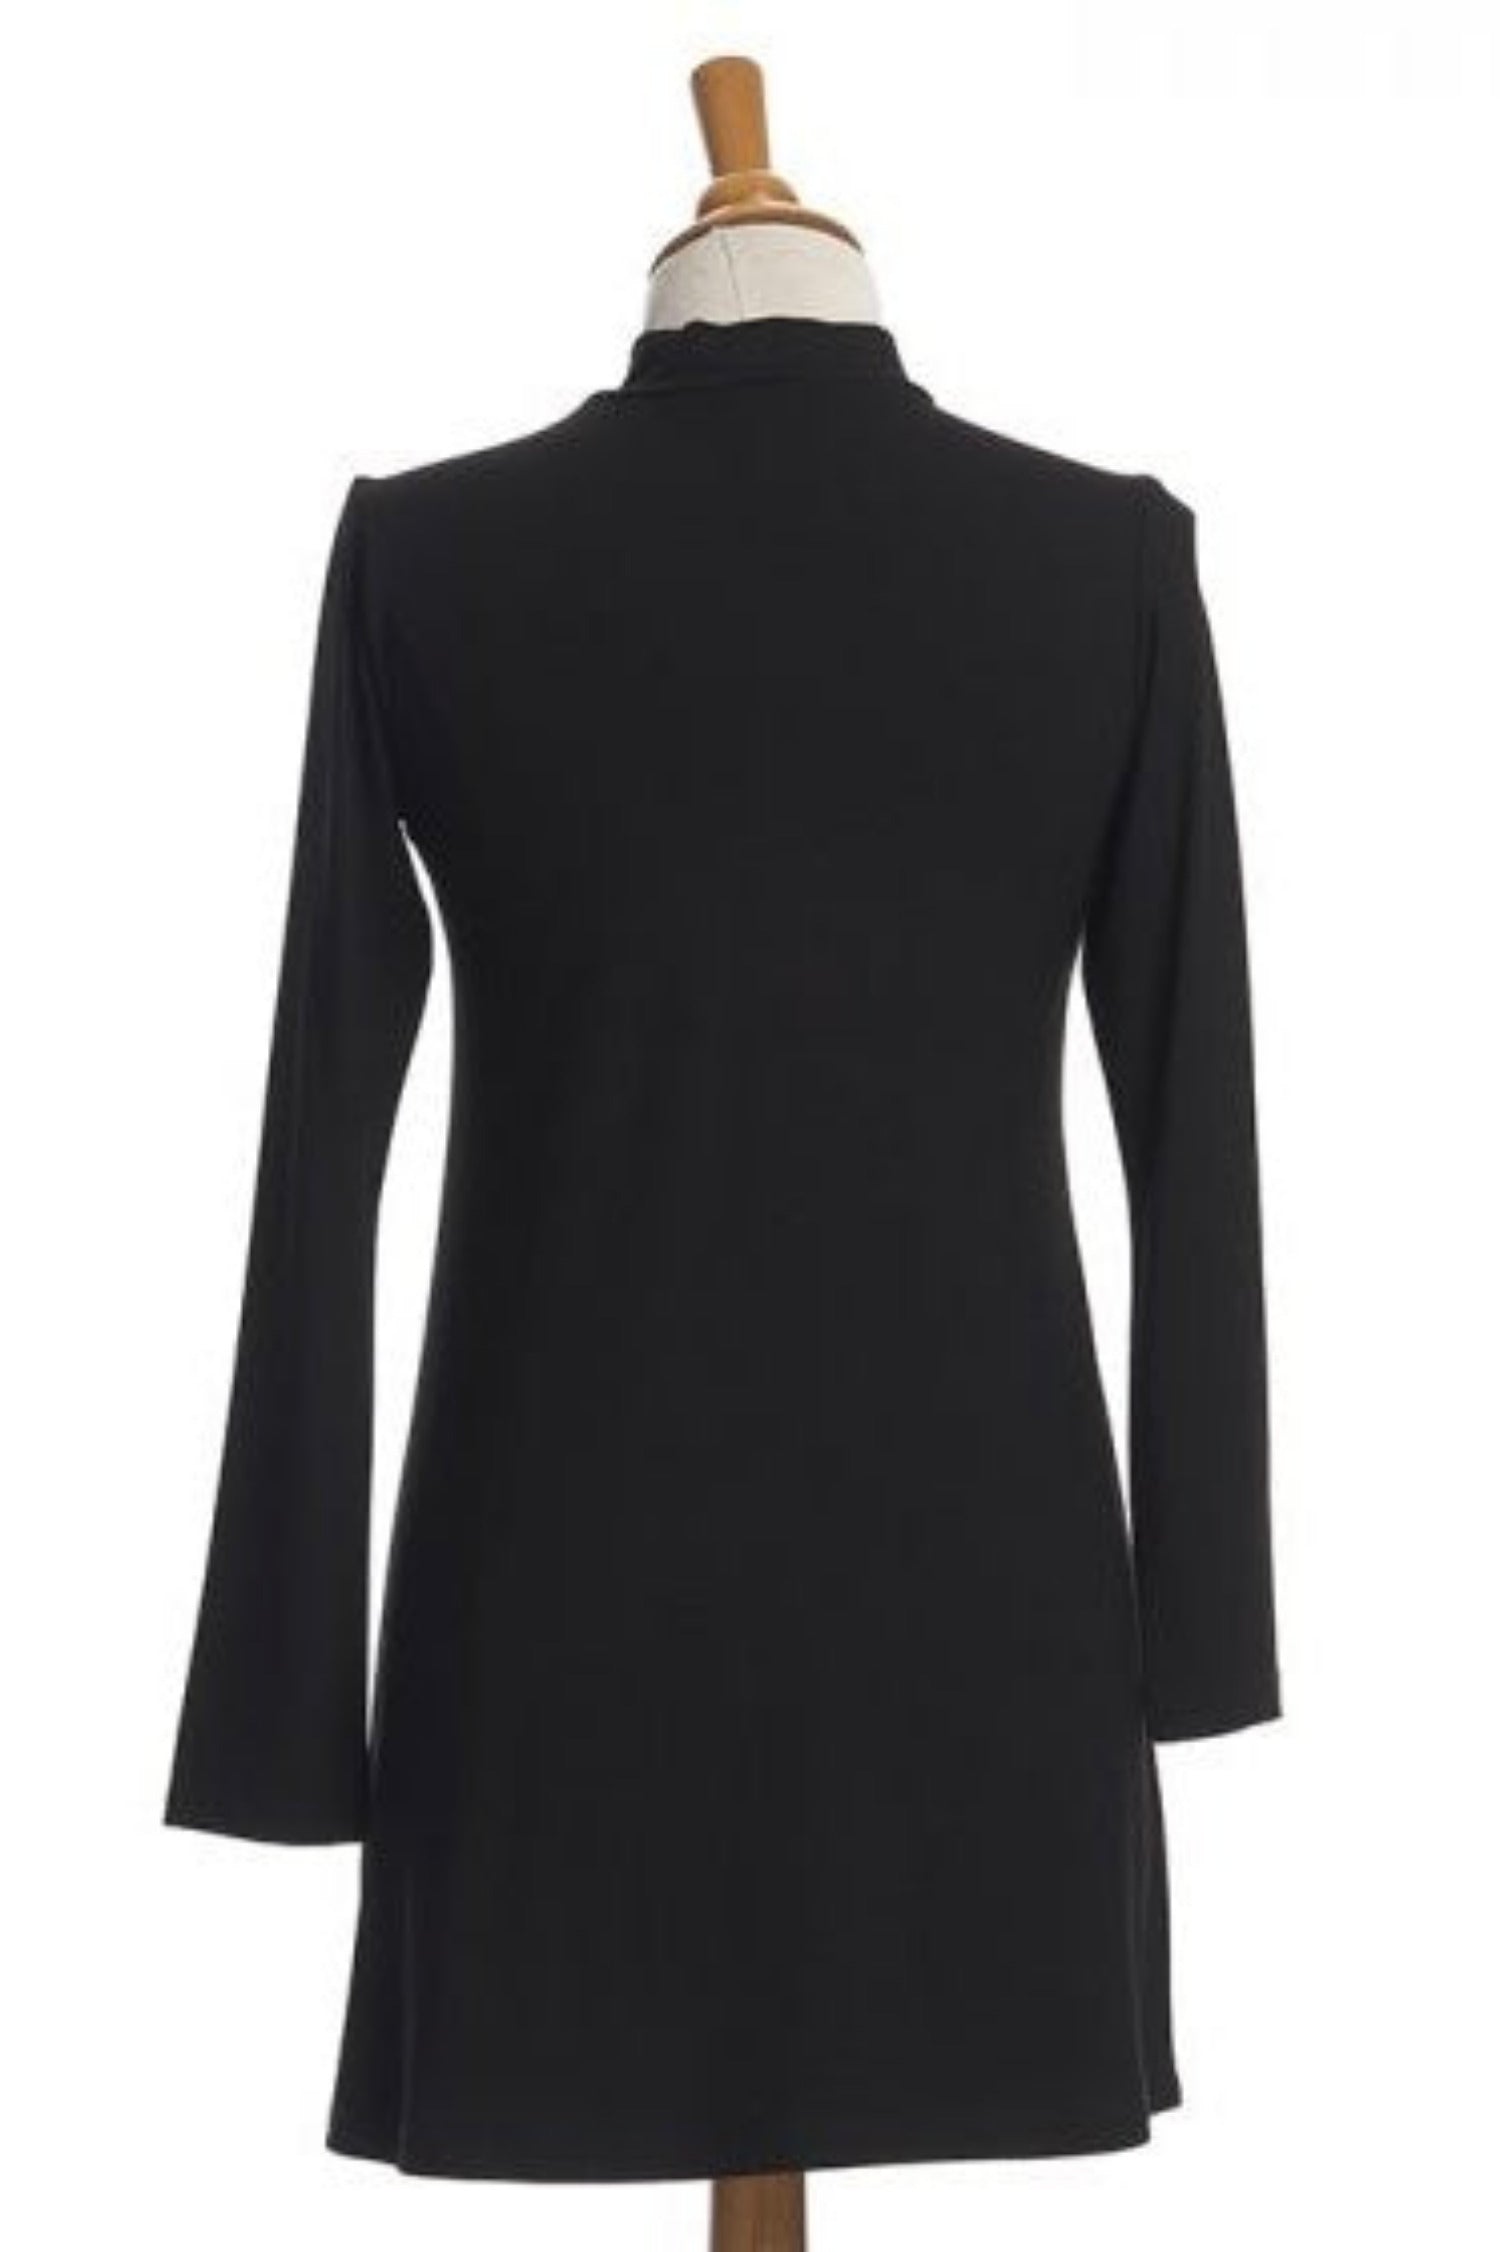 Observation Tunic by Rien ne se Perd, Black, back view, mock turtleneck, trapeze shape, sizes XS to XXL, made in Quebec